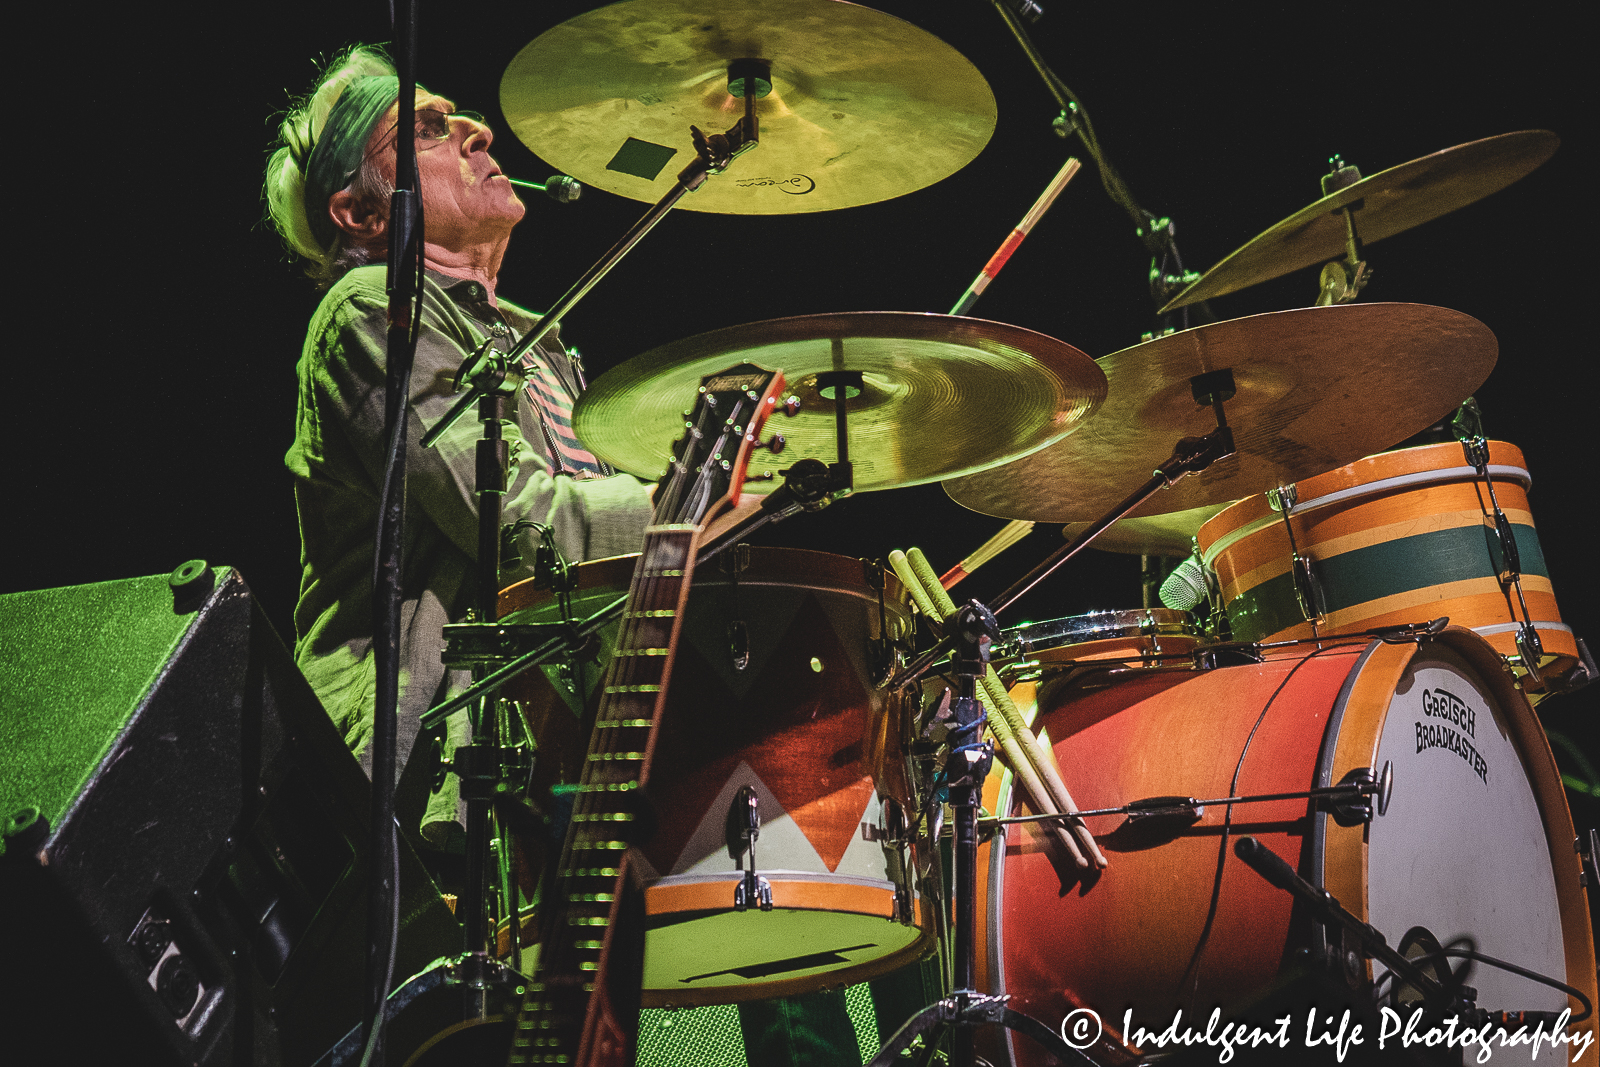 Nitty Gritty Dirt Band drummer Jimmie Fadden performing live at Ameristar Casino's Star Pavilion in Kansas City, MO on July 8, 2023.